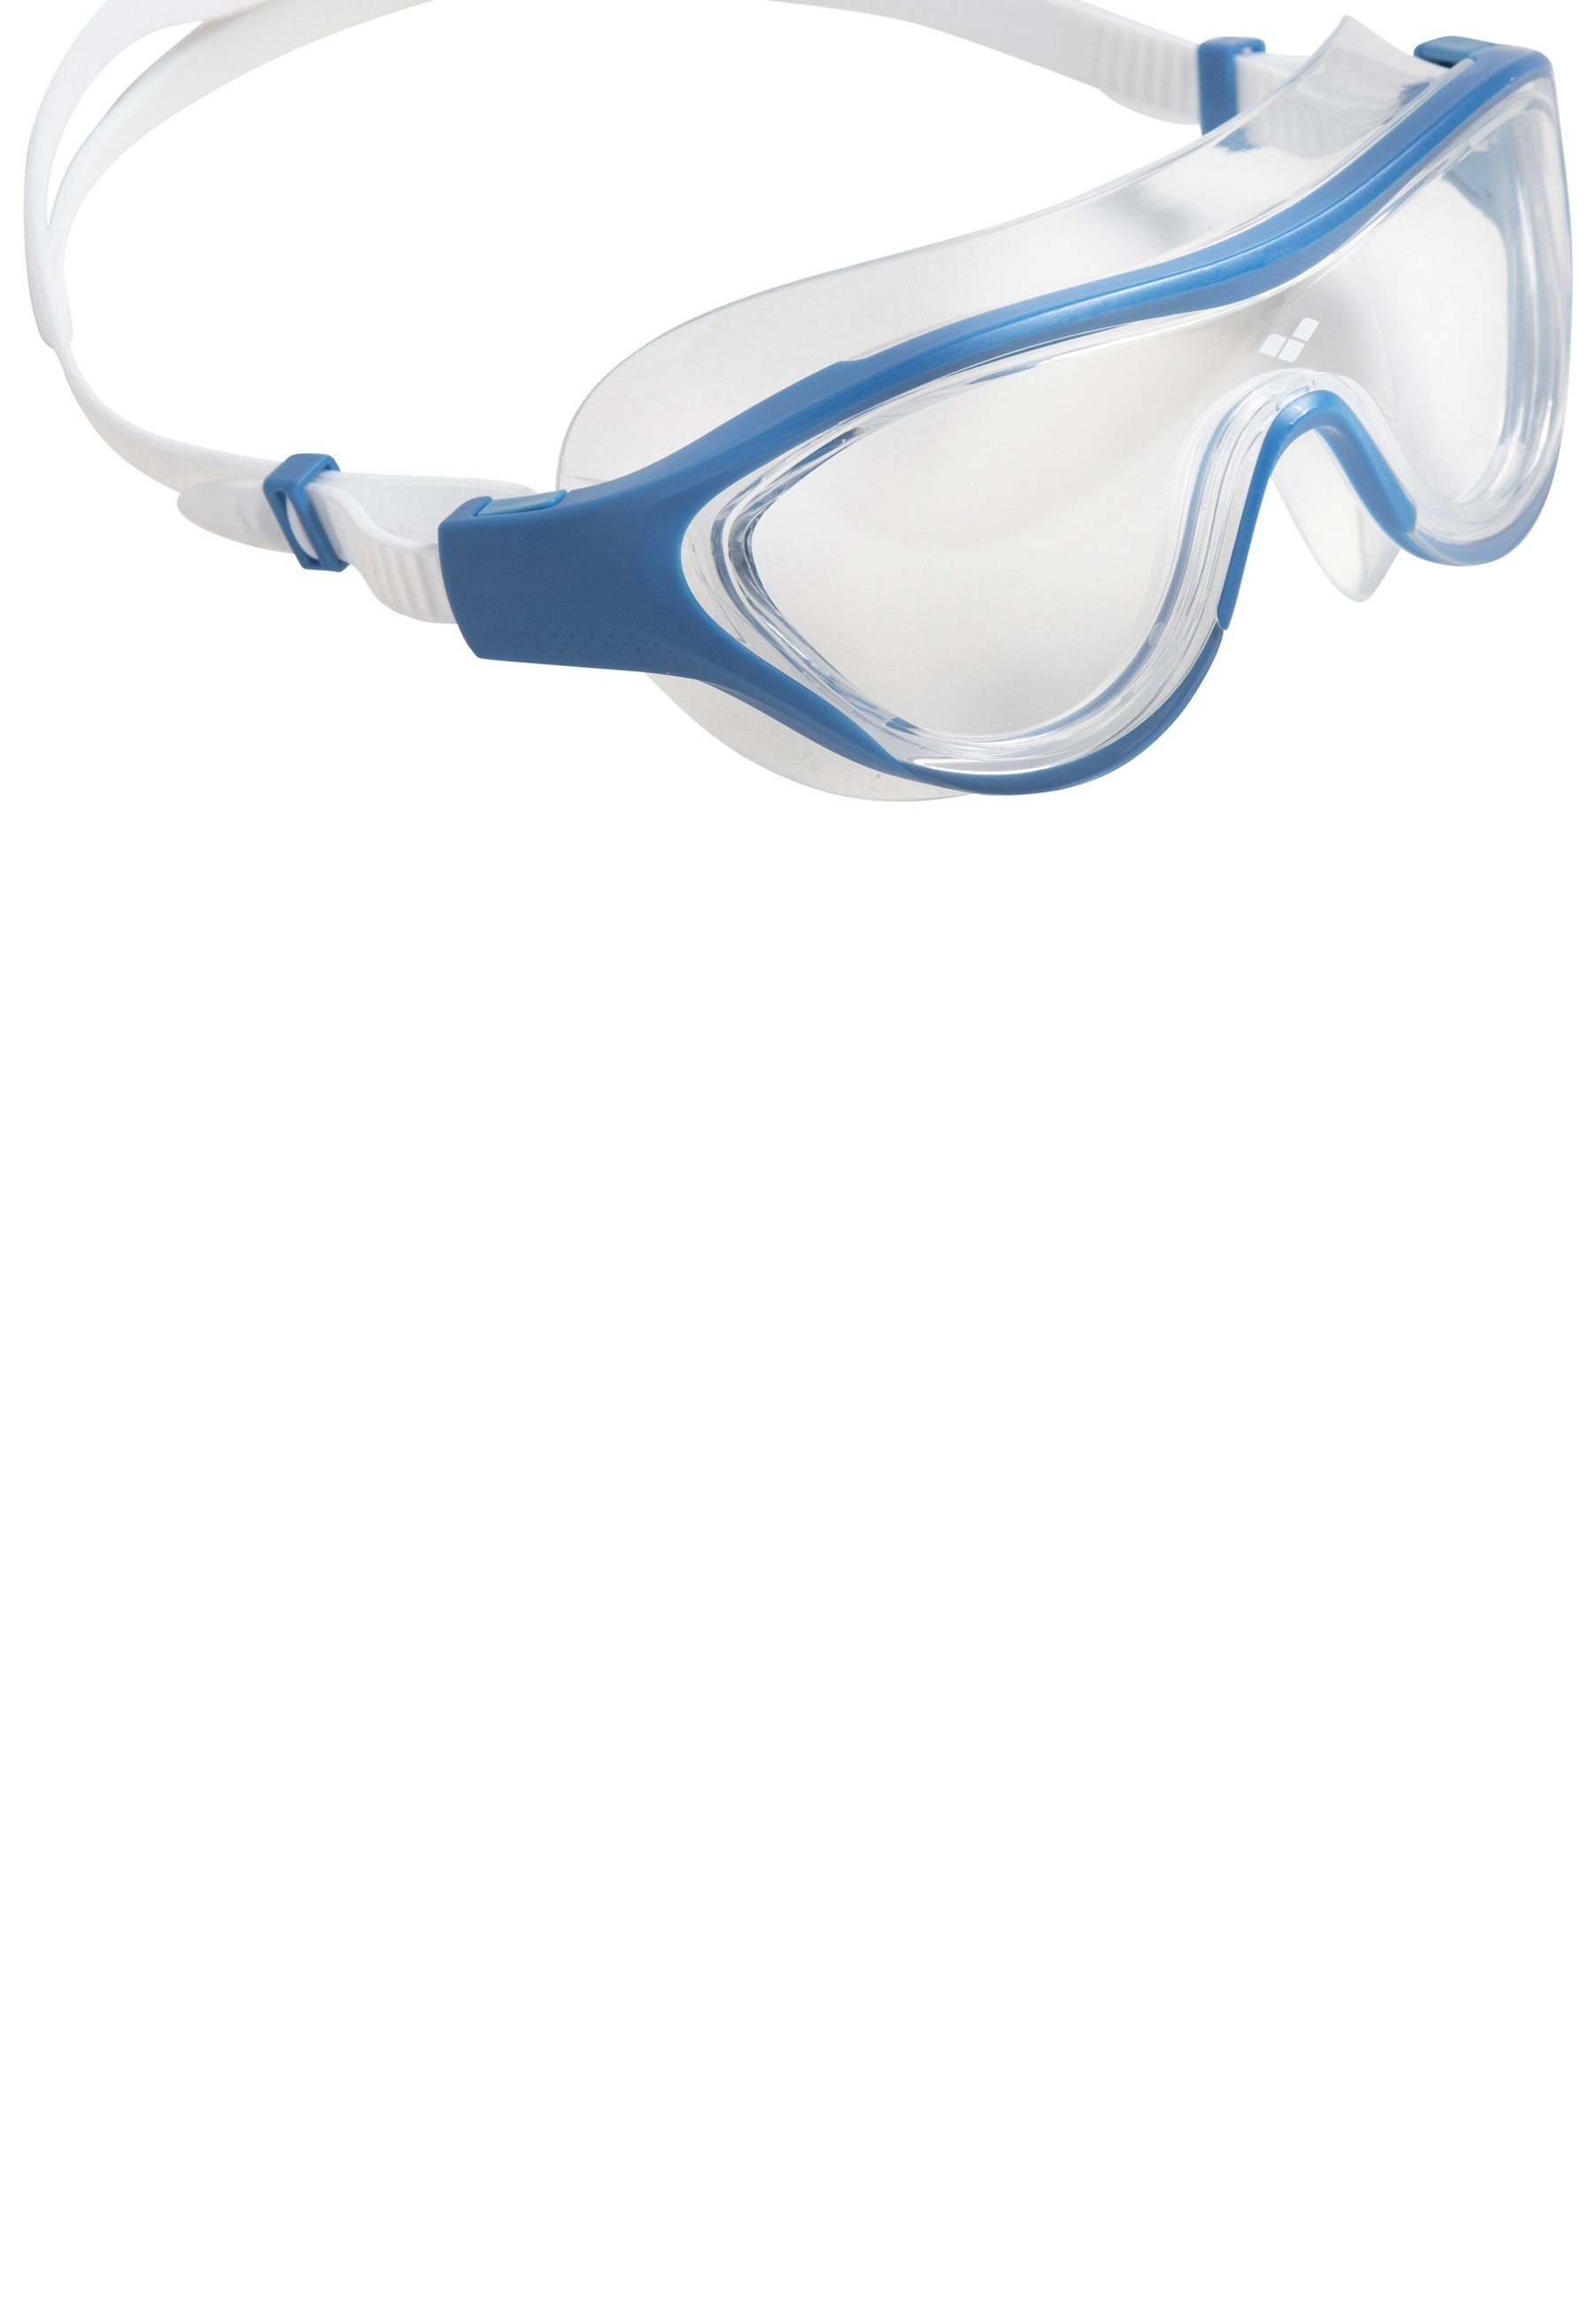 The Sportbrille Arena Mask clear-blue-white One